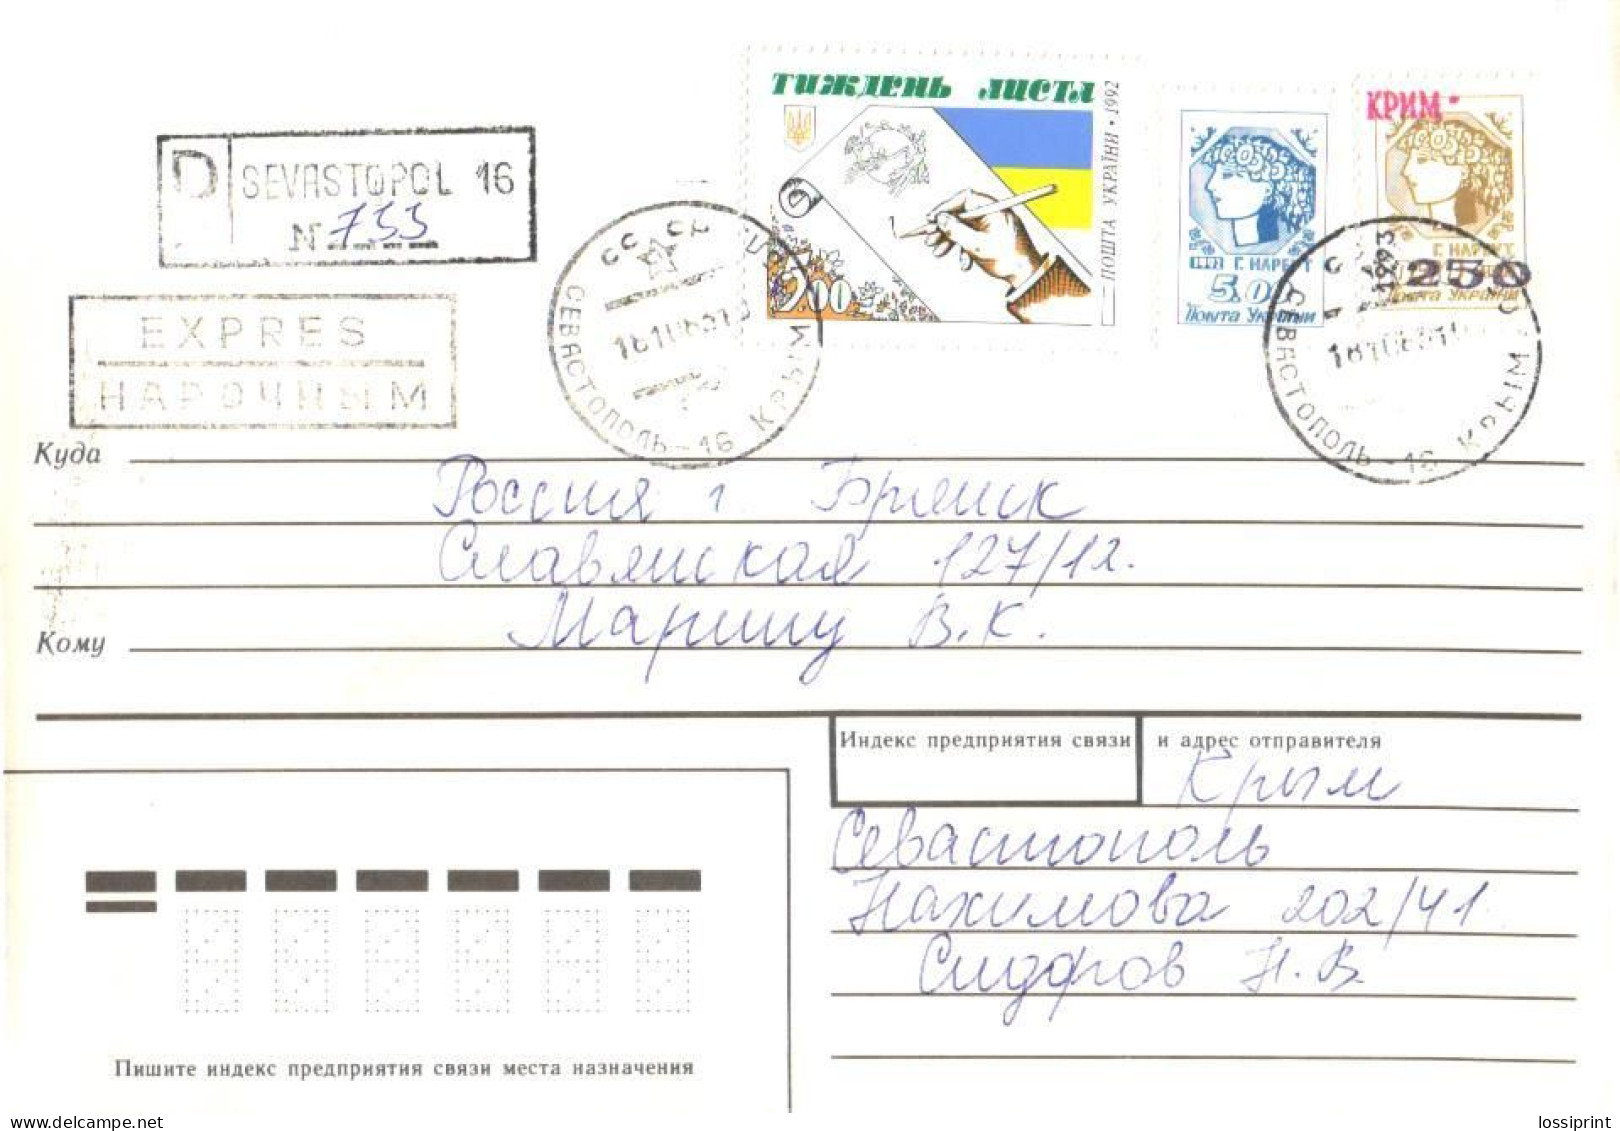 Ukraine:Ukraina:Registered Letter From Sevastopol With Expres Cancellation And Overprinted Stamp, 1993 - Ucrania